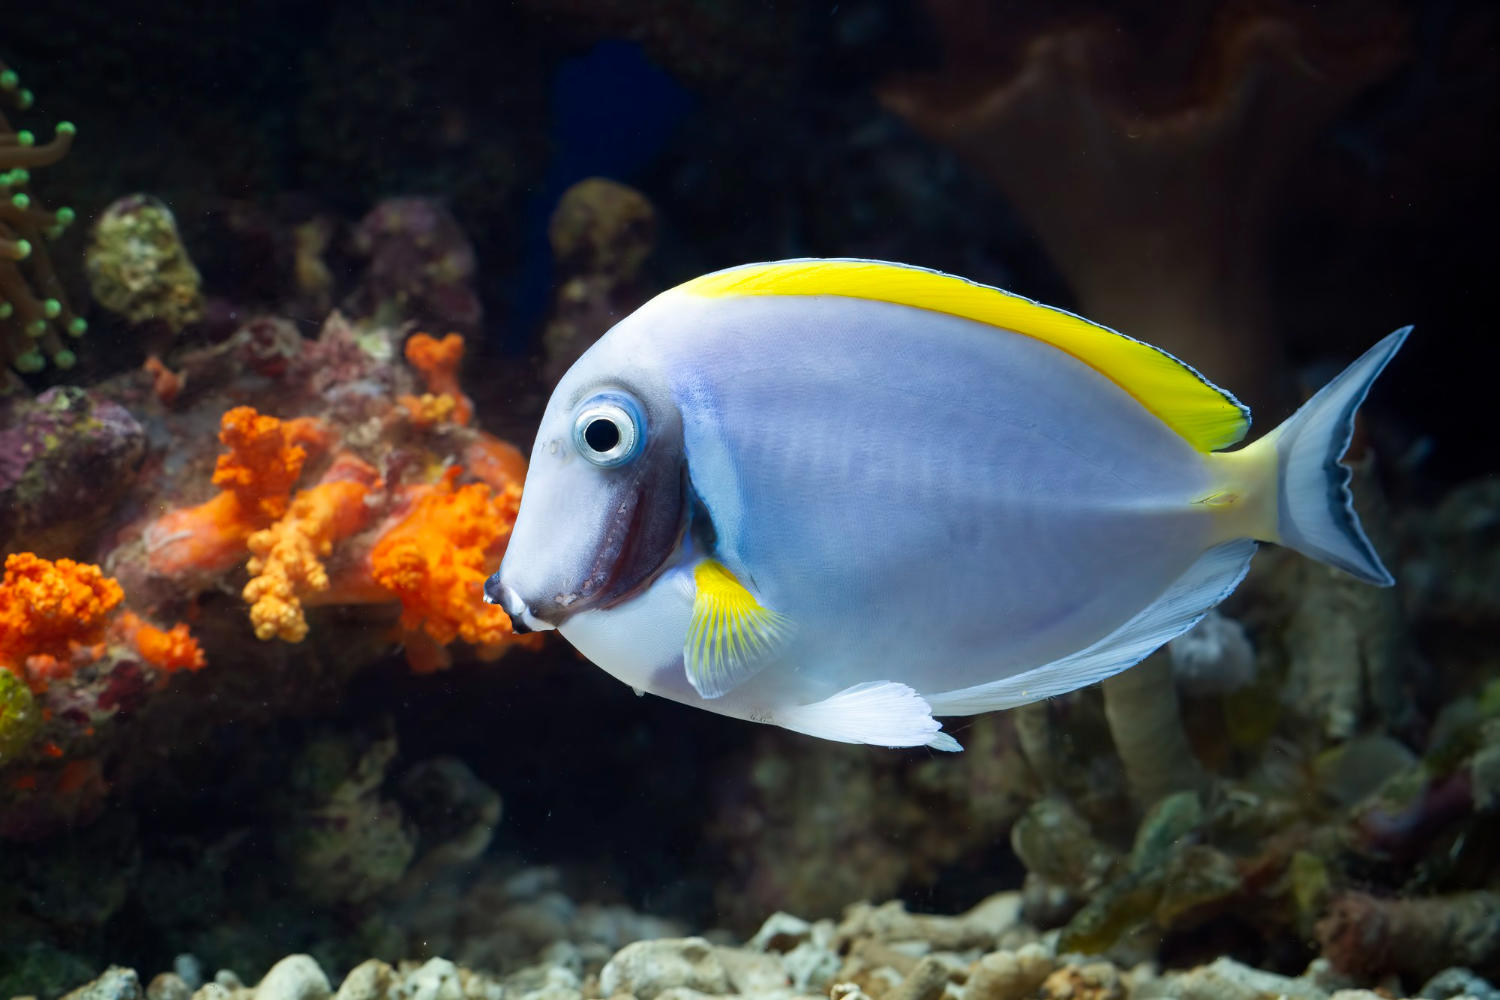 7 Effective Ways to Control Algae Growth in Your Fish Tank